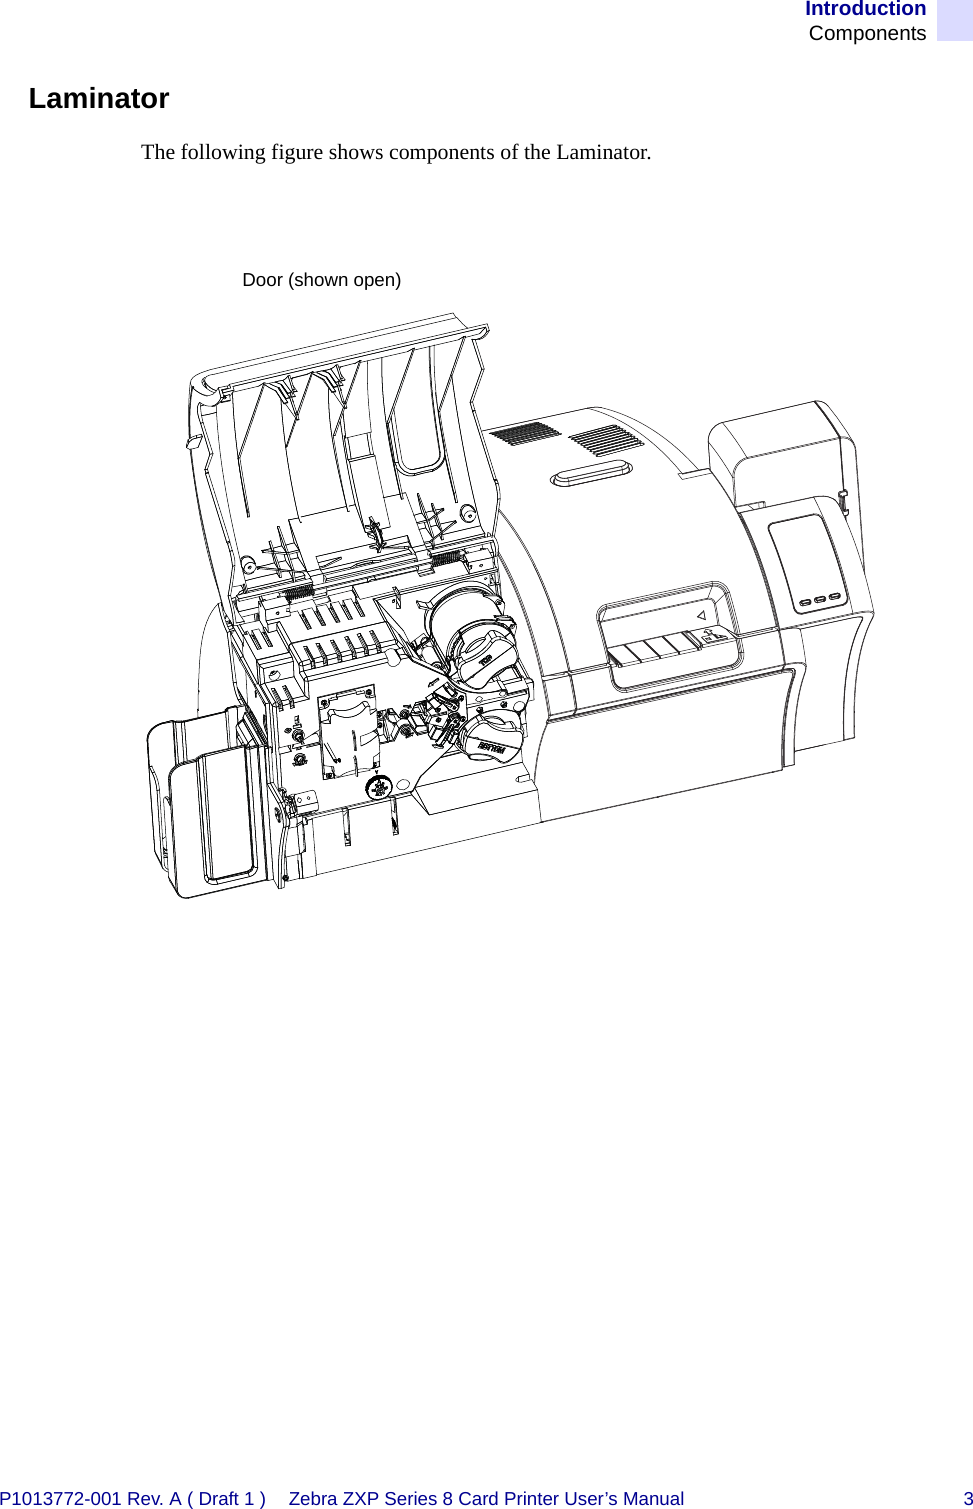 IntroductionComponentsP1013772-001 Rev. A ( Draft 1 ) Zebra ZXP Series 8 Card Printer User’s Manual 3LaminatorThe following figure shows components of the Laminator.Door (shown open)